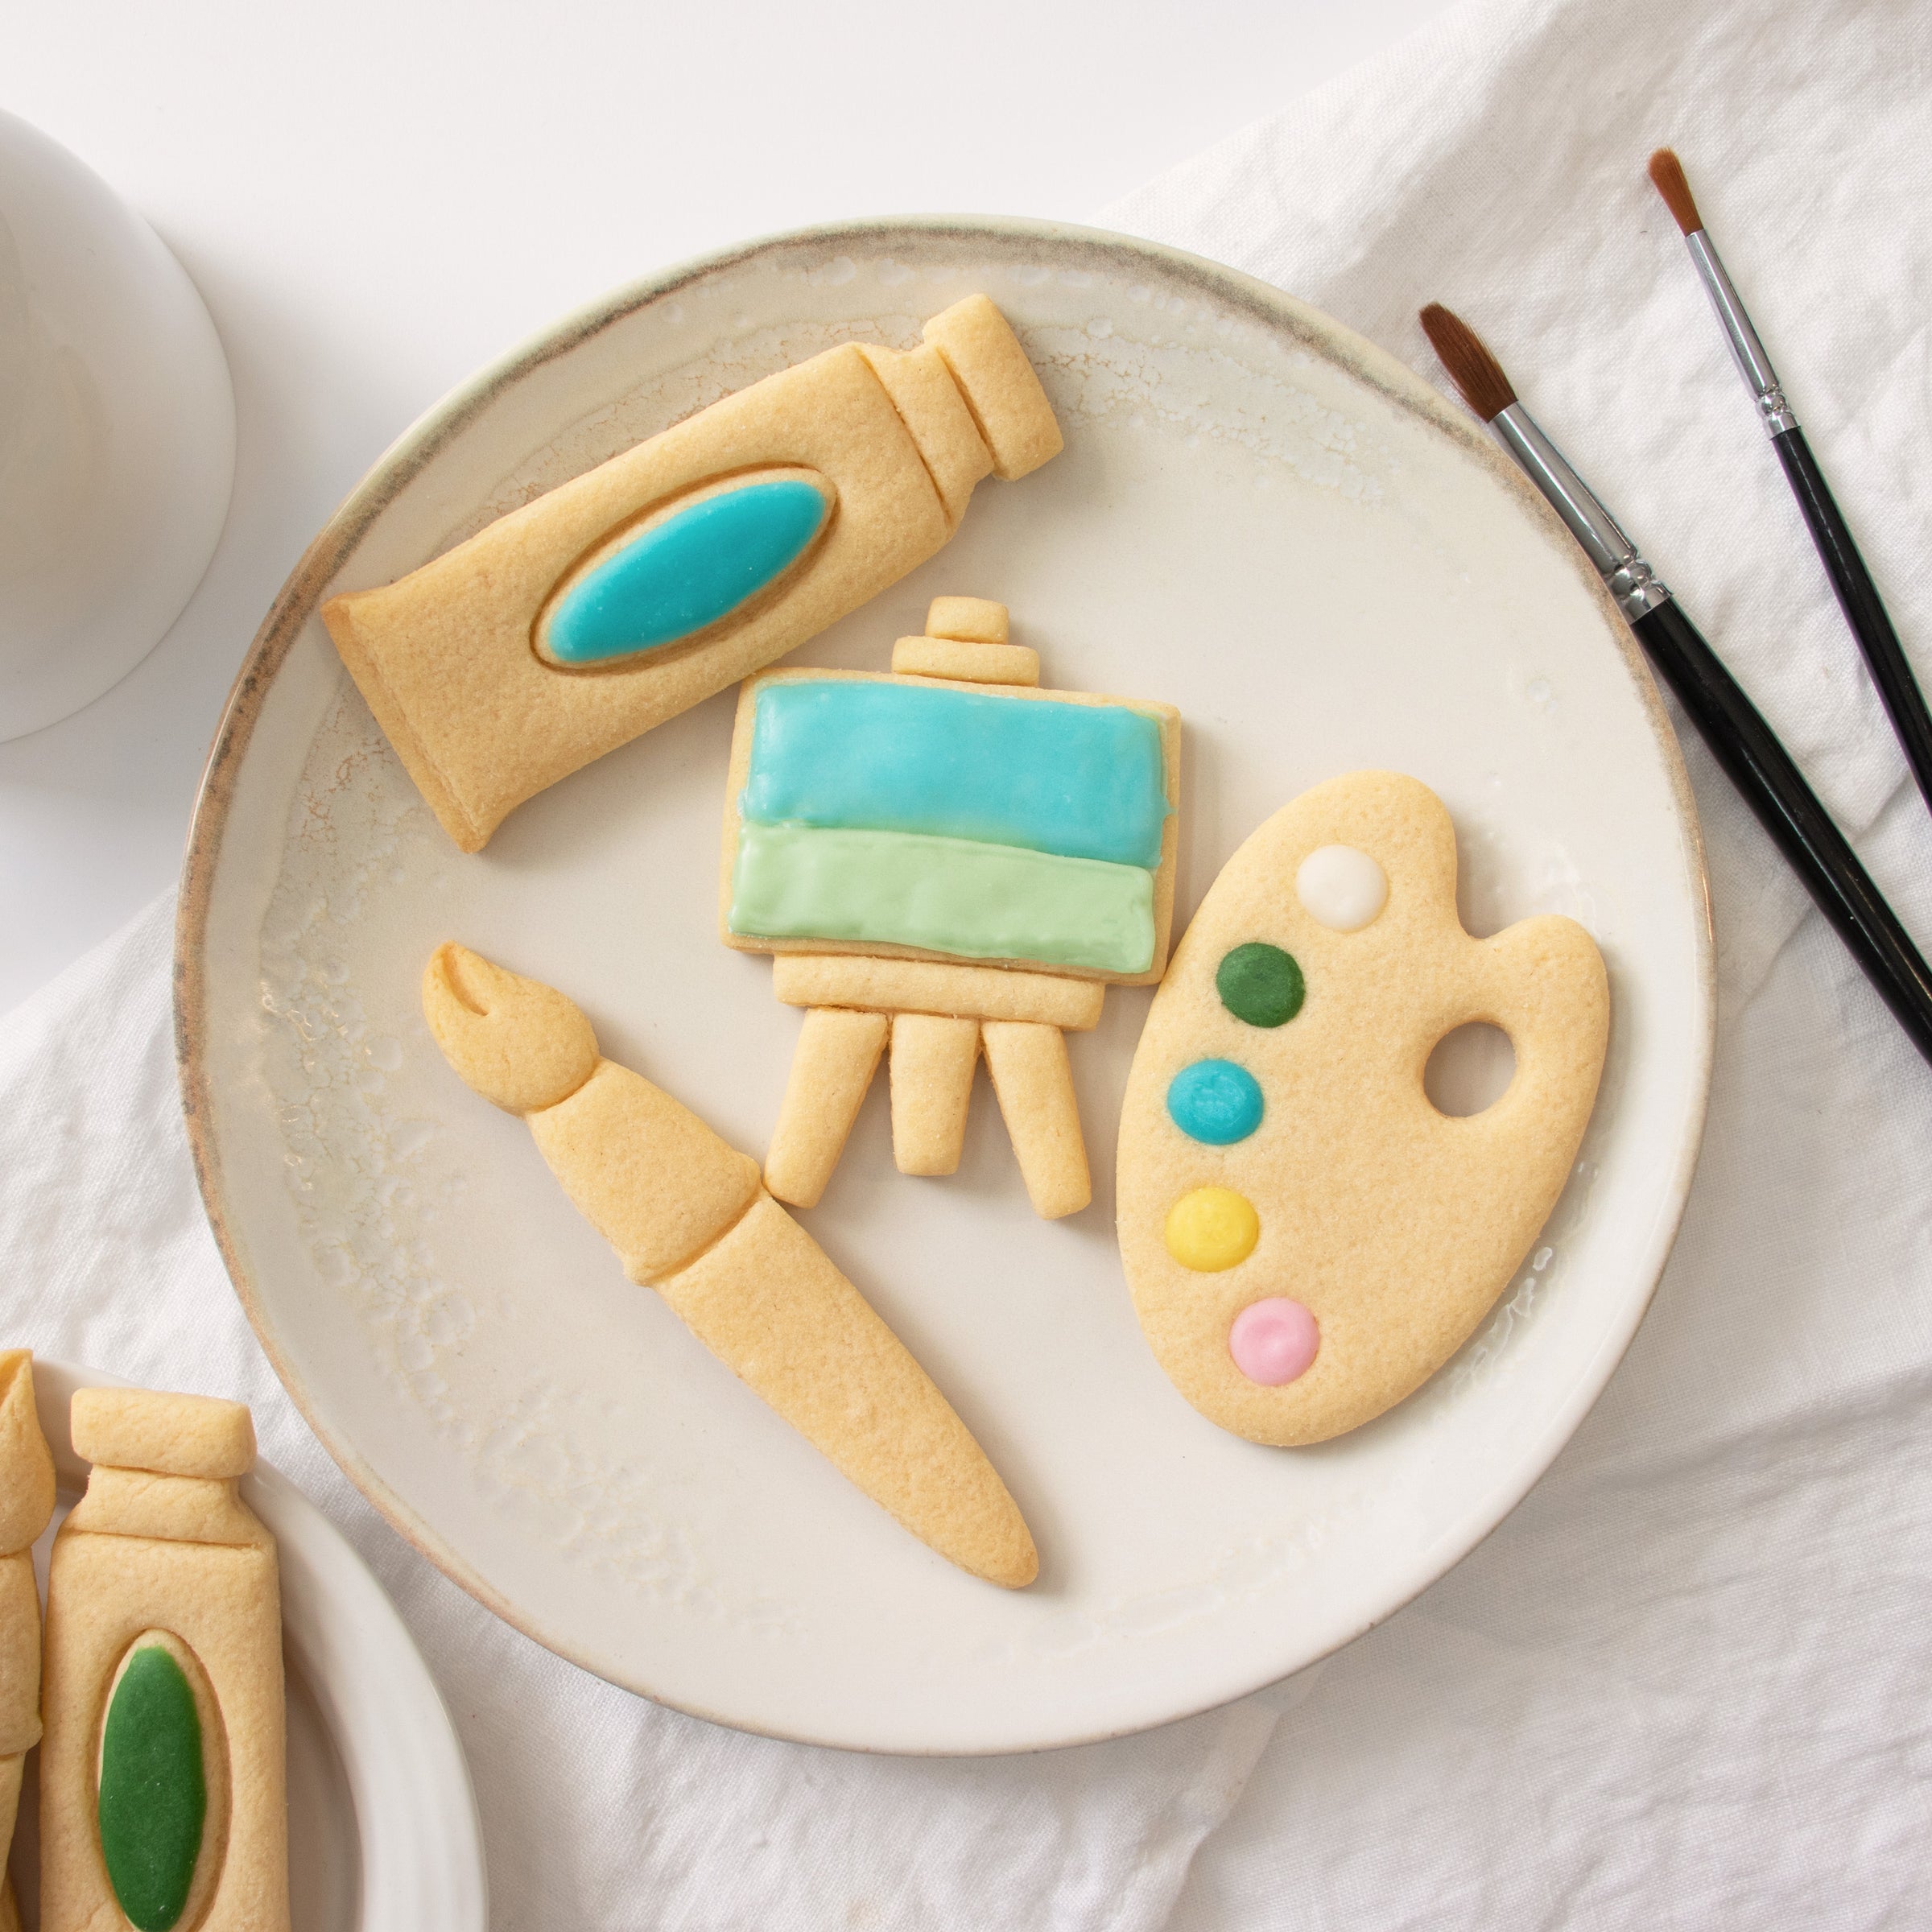 set of 4 artist accessories: featuring a palette, paintbrush, paint tube and easel stand cookies